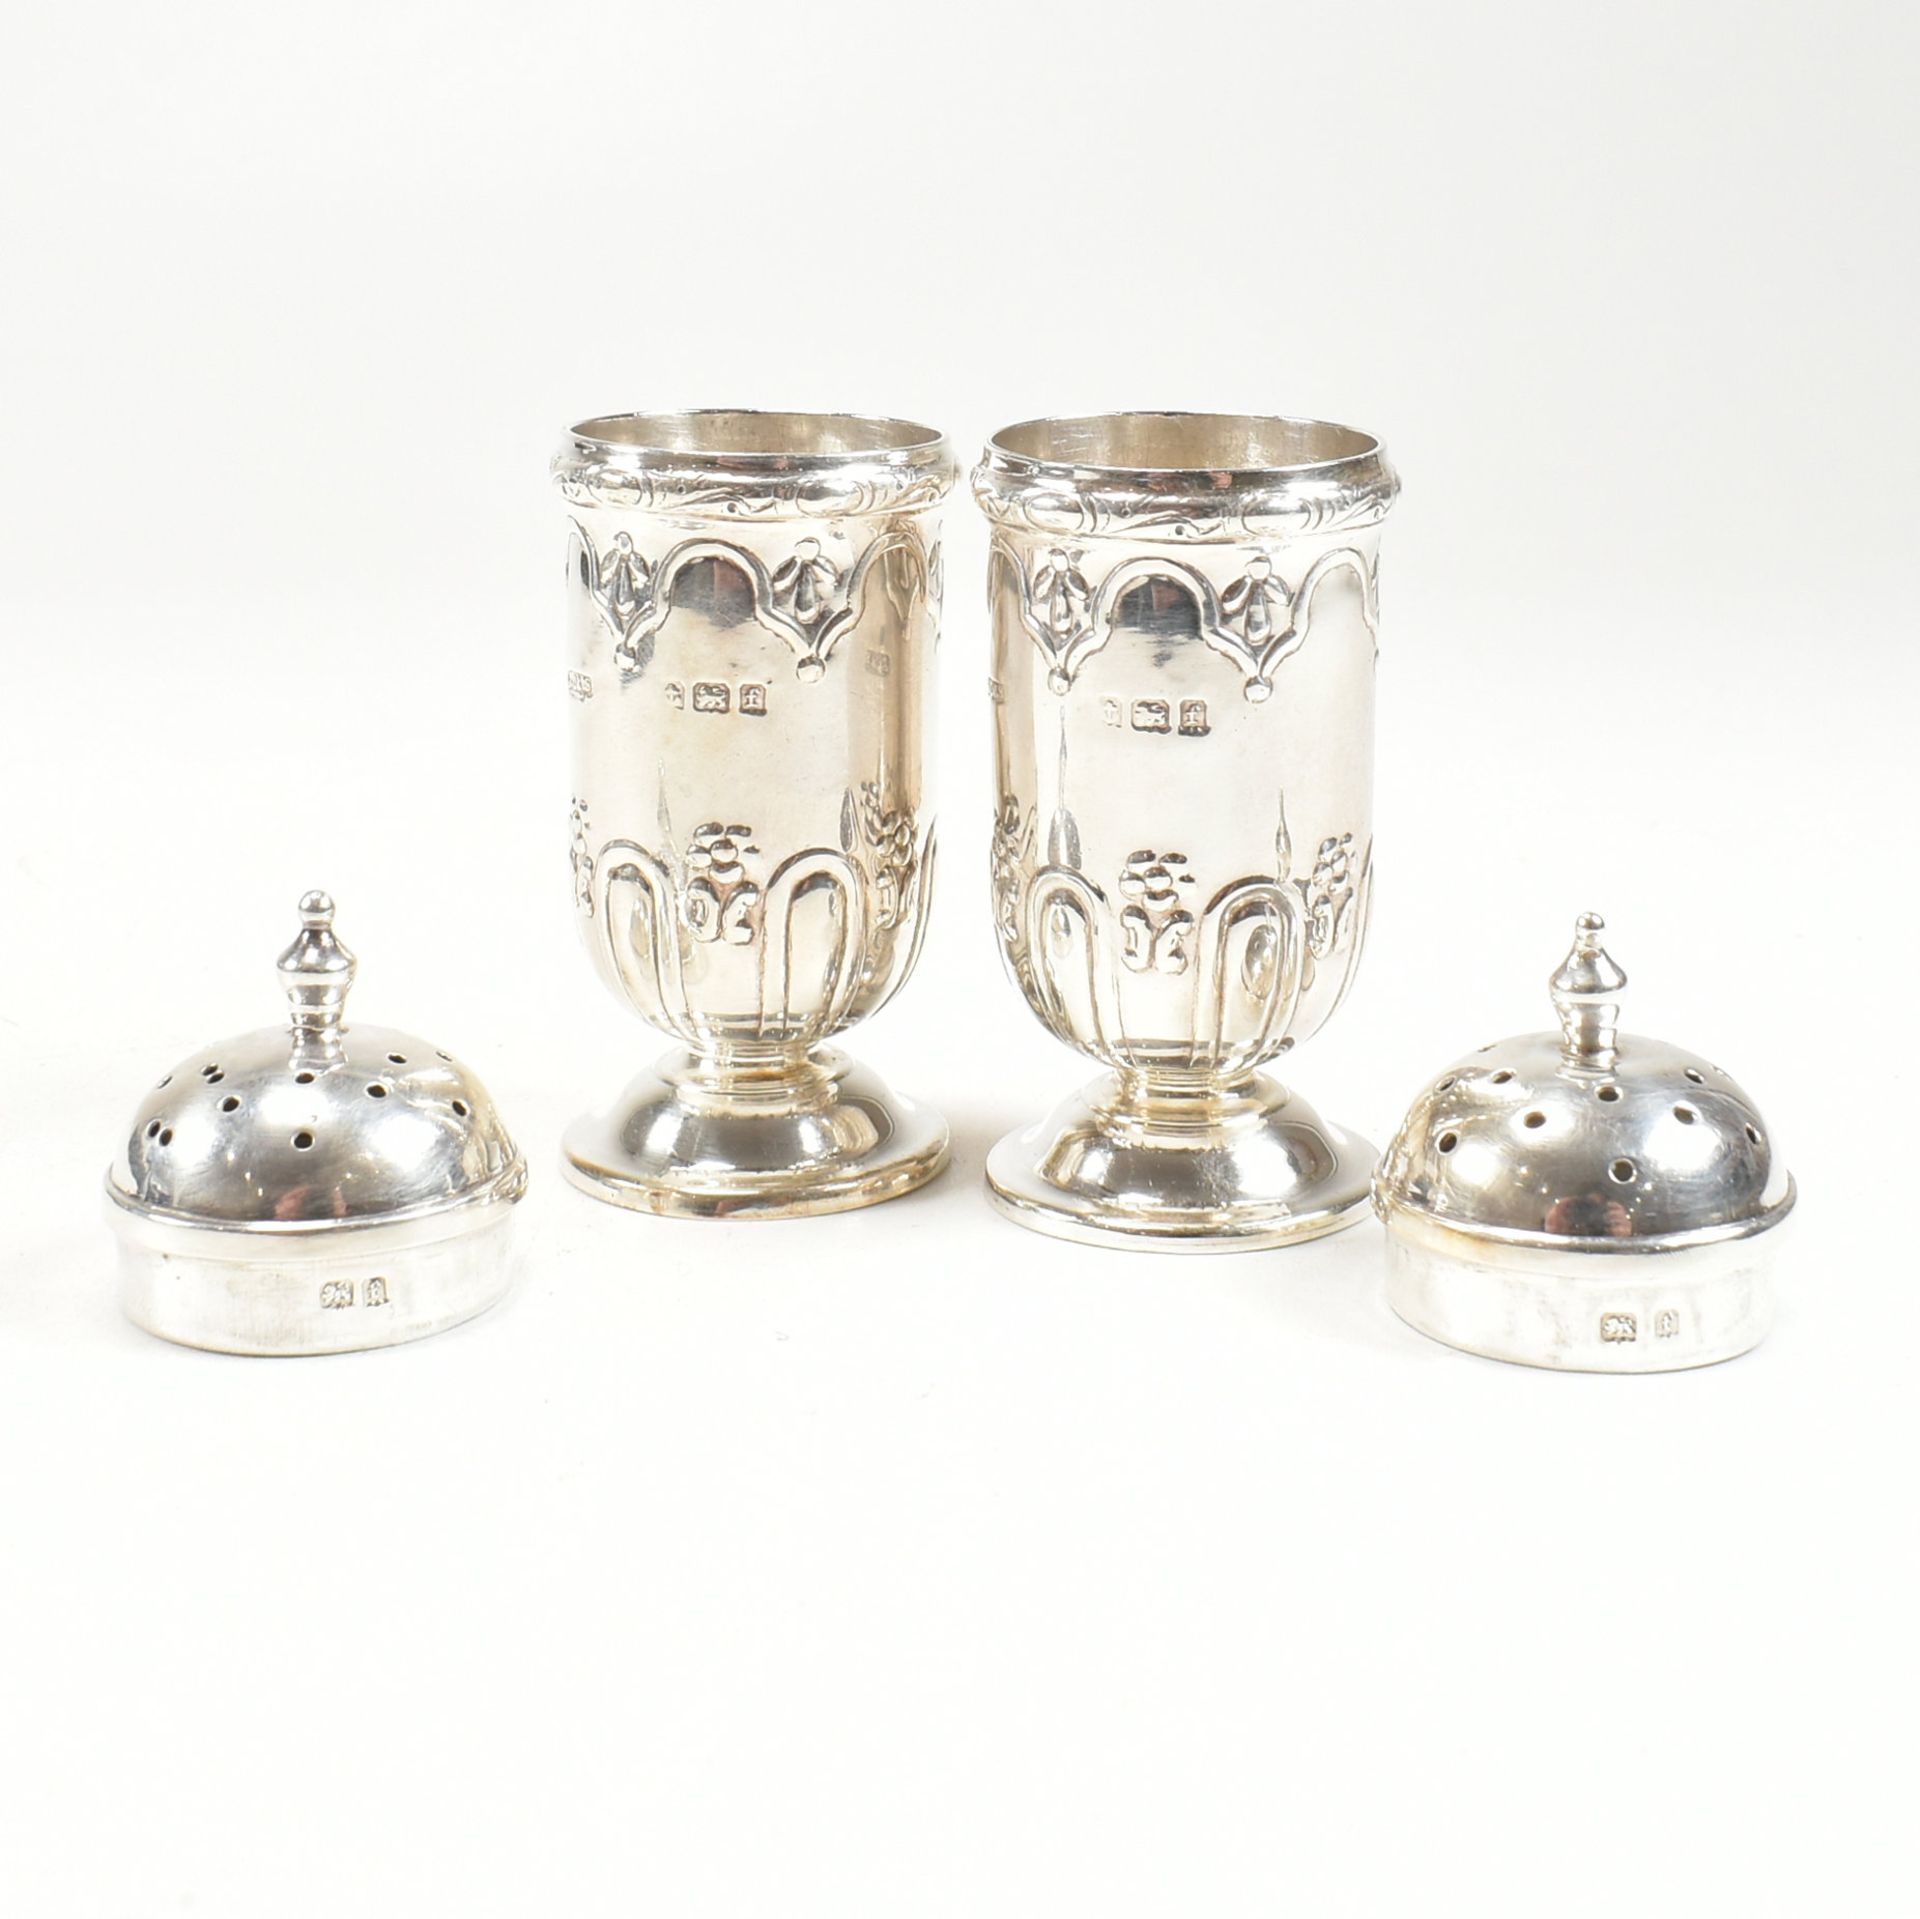 TWO EARLY 20TH CENTURY CASED HALLMARKED SILVER CRUET SETS - Image 4 of 9